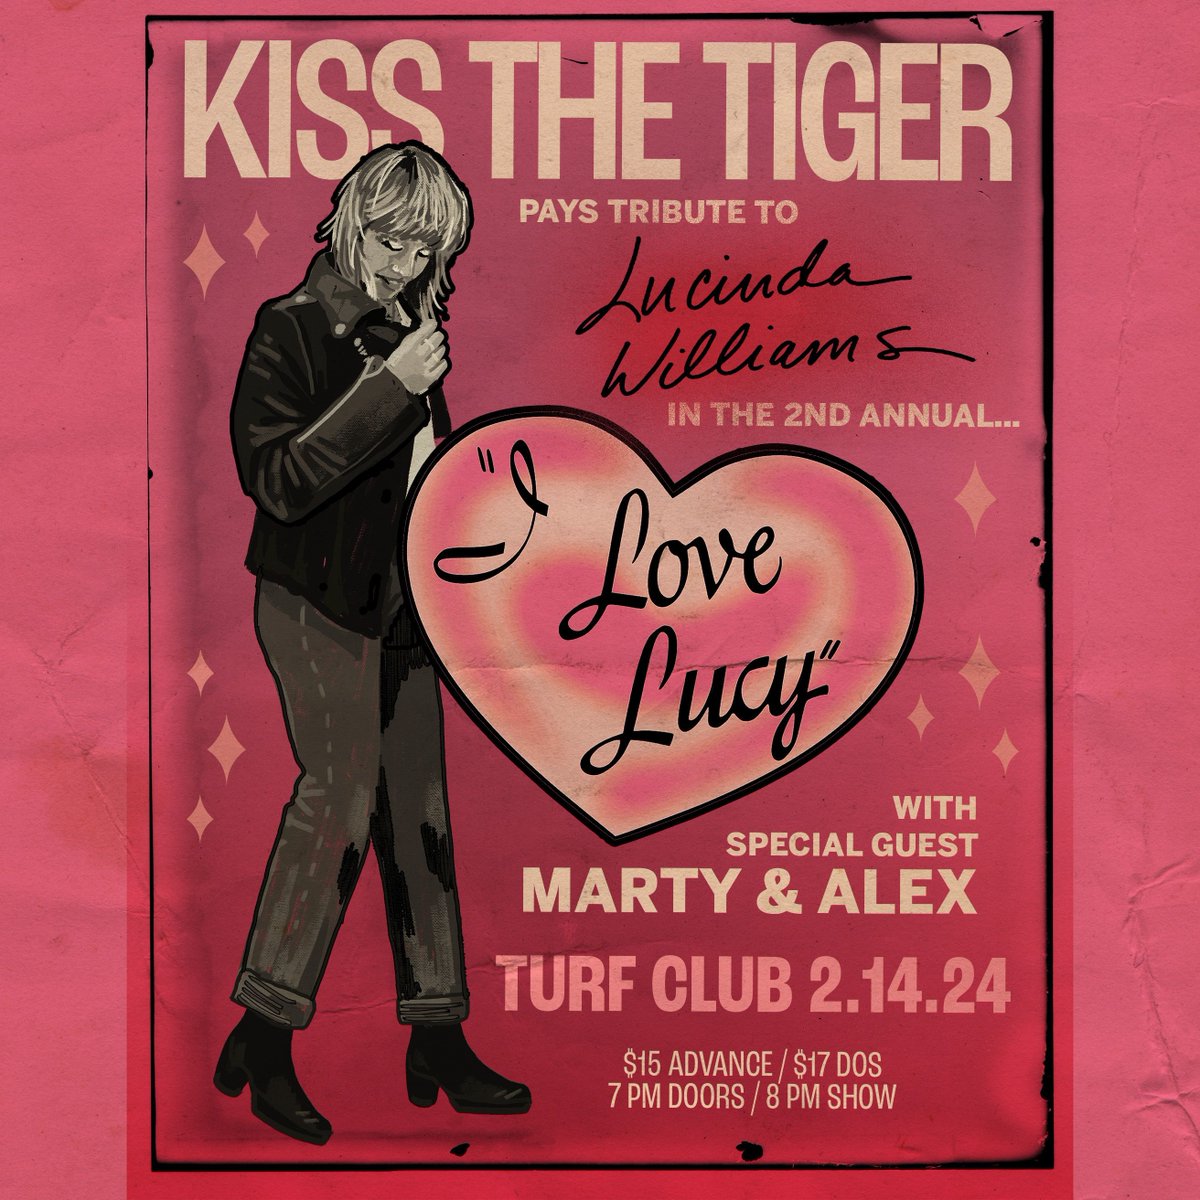 Just Announced: I Love Lucy — @kissthetiger1 Pays Tribute to Lucinda Williams at the Turf Club on February 1. On sale now → firstavenue.me/47il76o